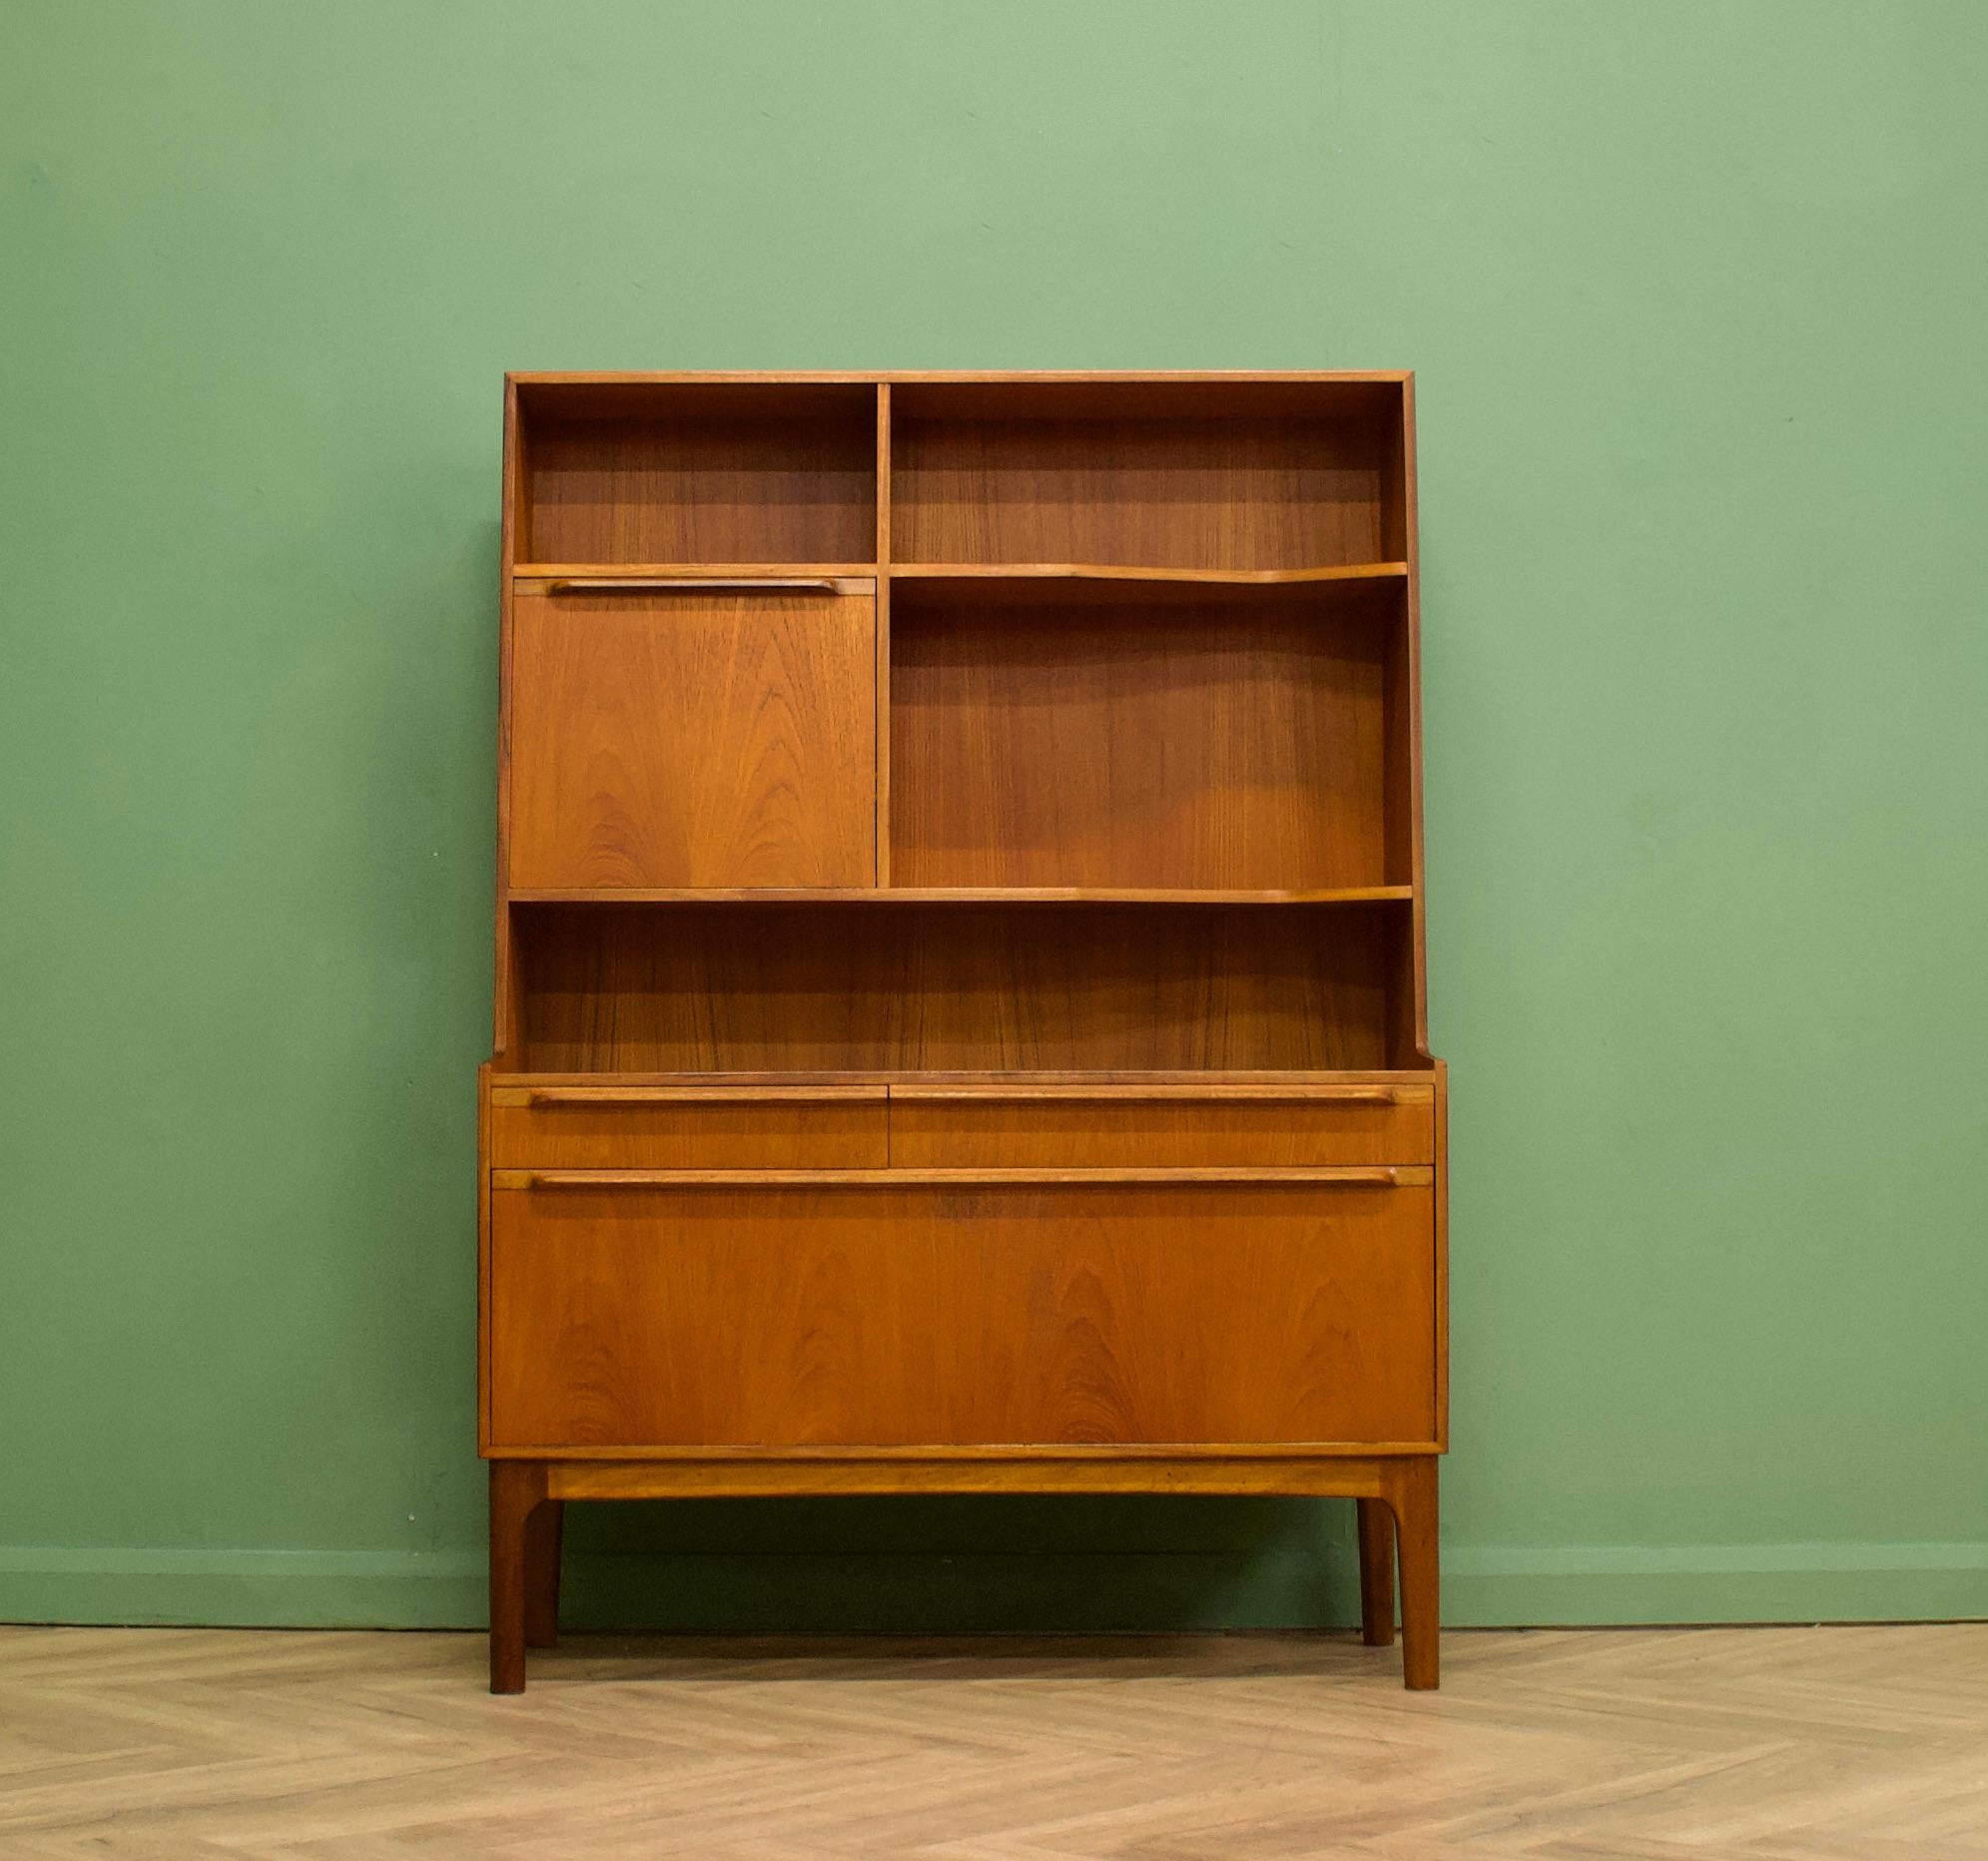 A teak drinks cabinet or highboard from McIntosh - Circa 1960s

It features two pull down drinks compartments, two drawers and shelves

The piece stands on slightly splayed legs and each handle is solid teak